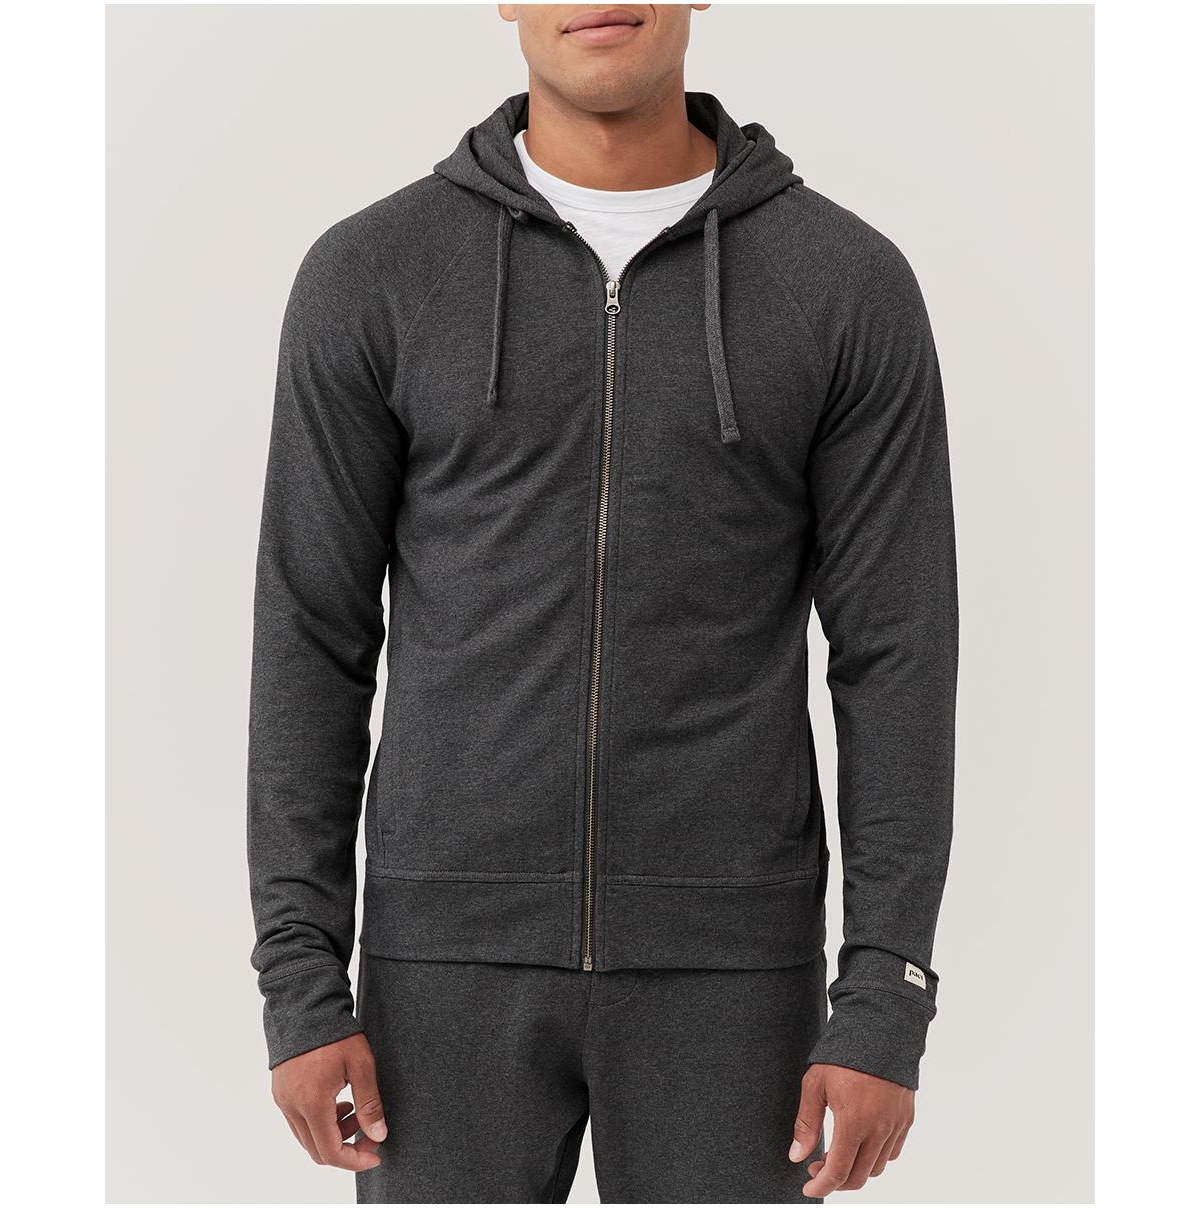 Organic Cotton Stretch French Terry Zip Hoodie - Ivy